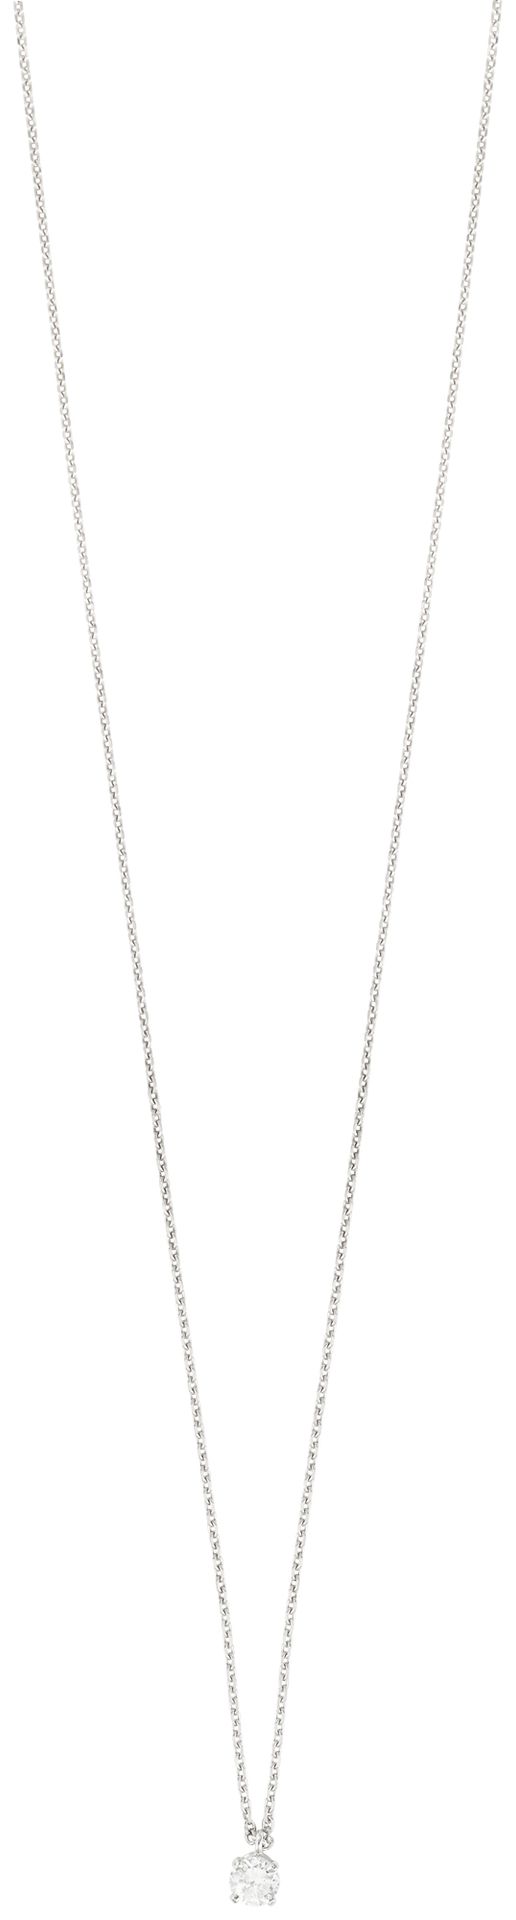 Collier in white gold holding a diamond weighing approx. 0.40 carat
L: 45 cm
Pb:&hellip;